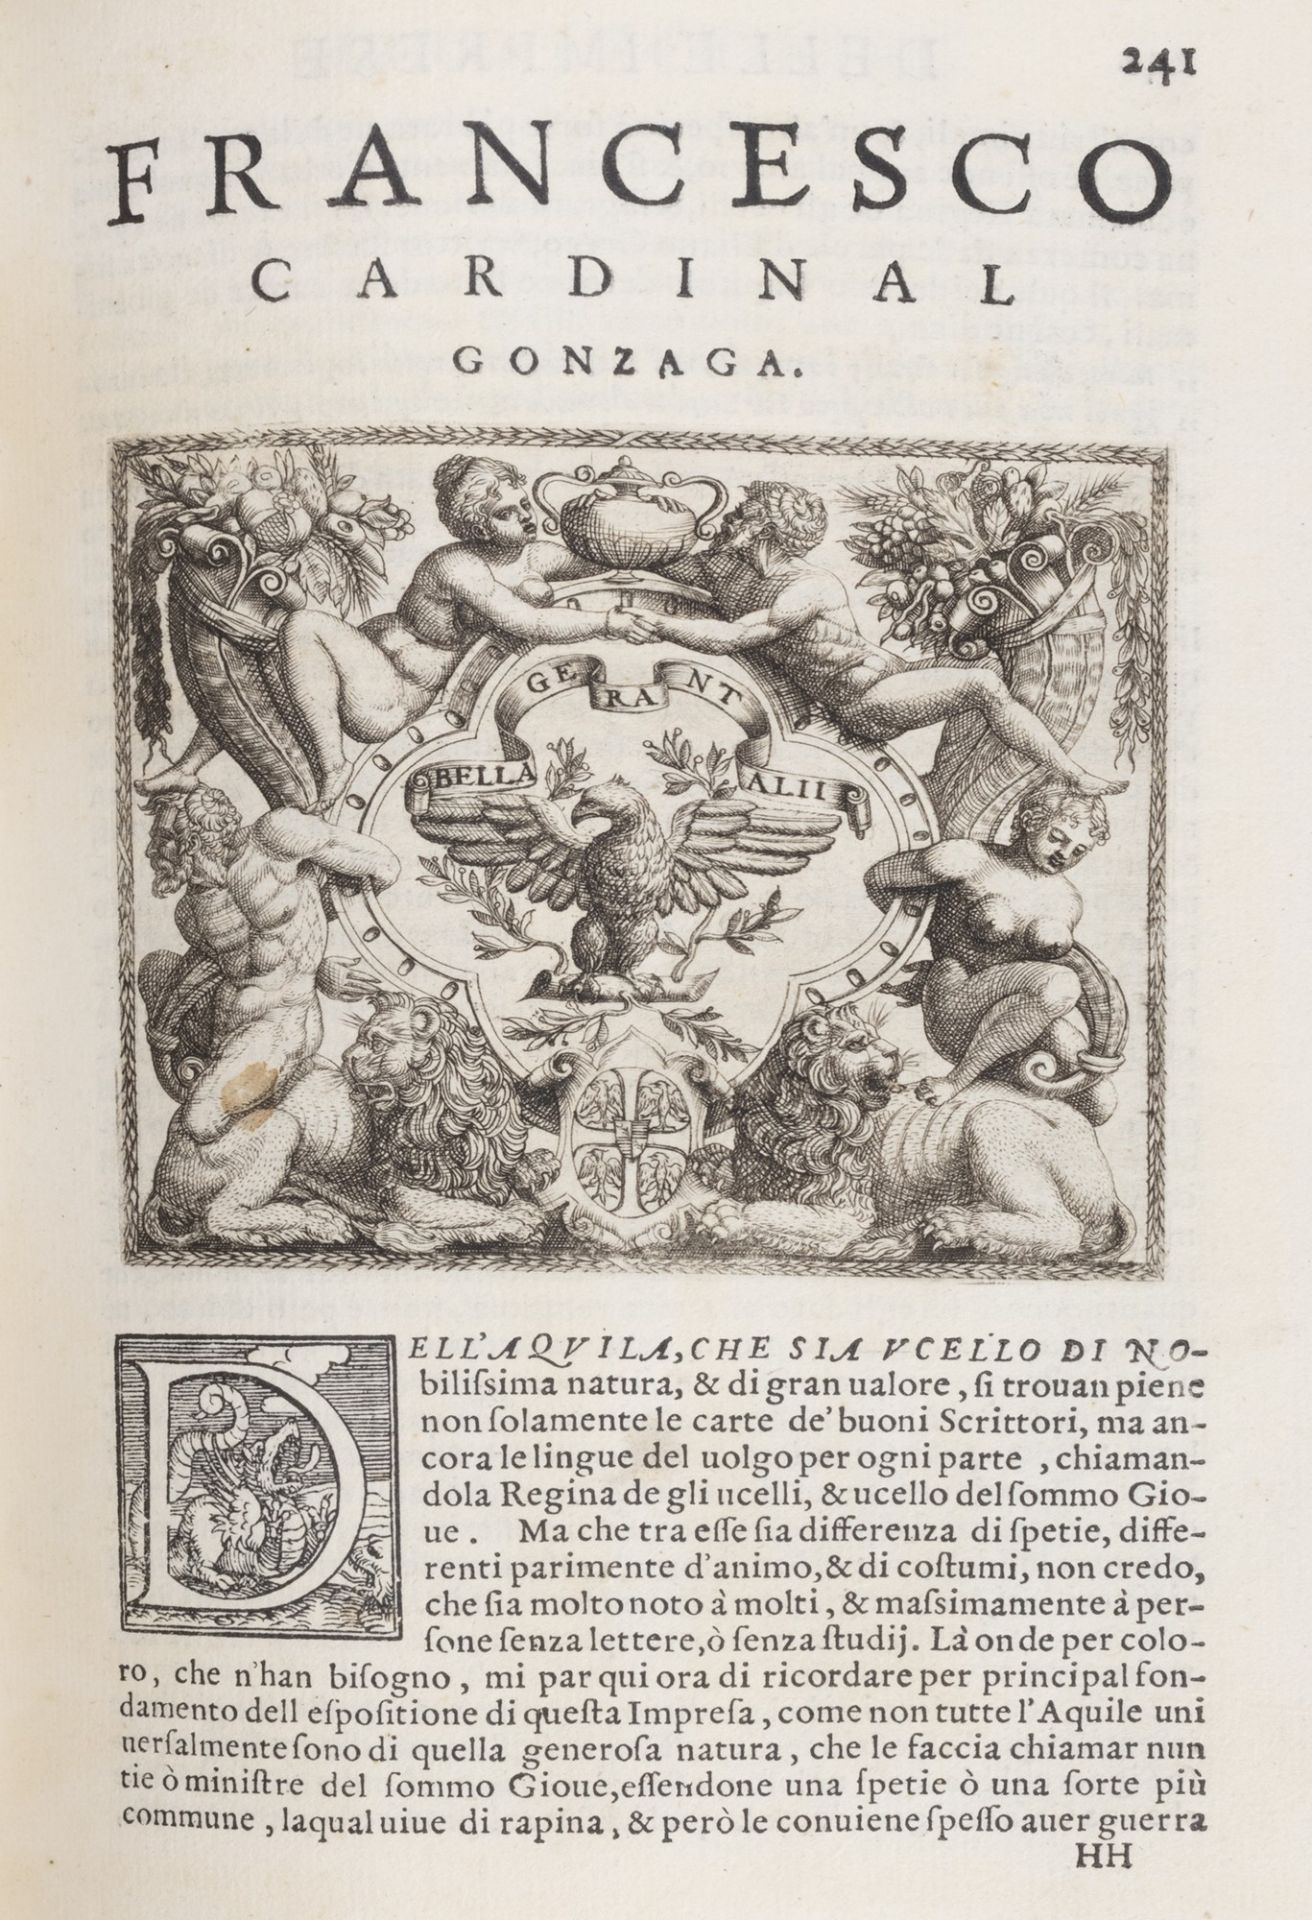 Emblemata - Ruscelli, Girolamo - Illustrious companies with exhibitions, and speeches by S.or Ieroni - Image 3 of 5